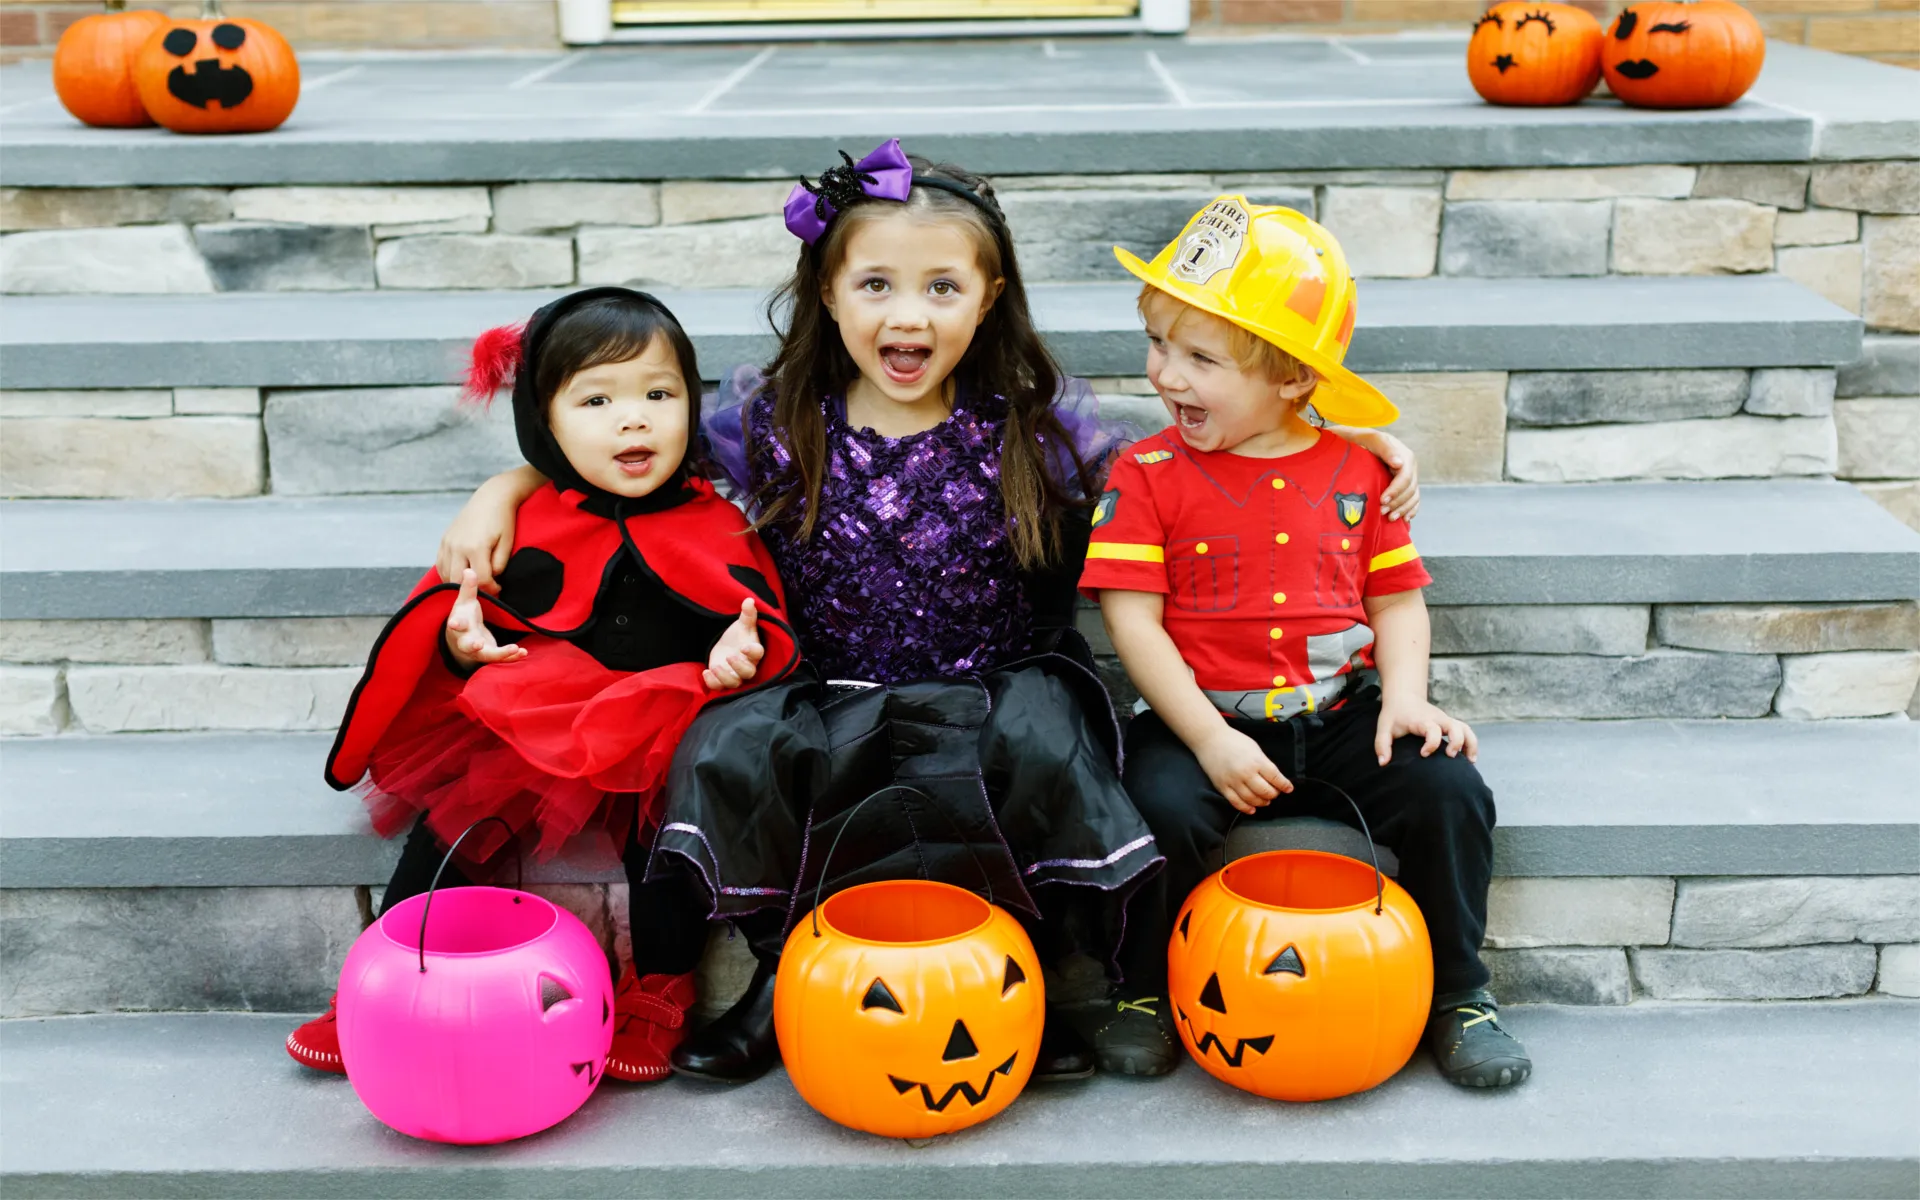 10 Safety Tips for a Spooktacular Halloween